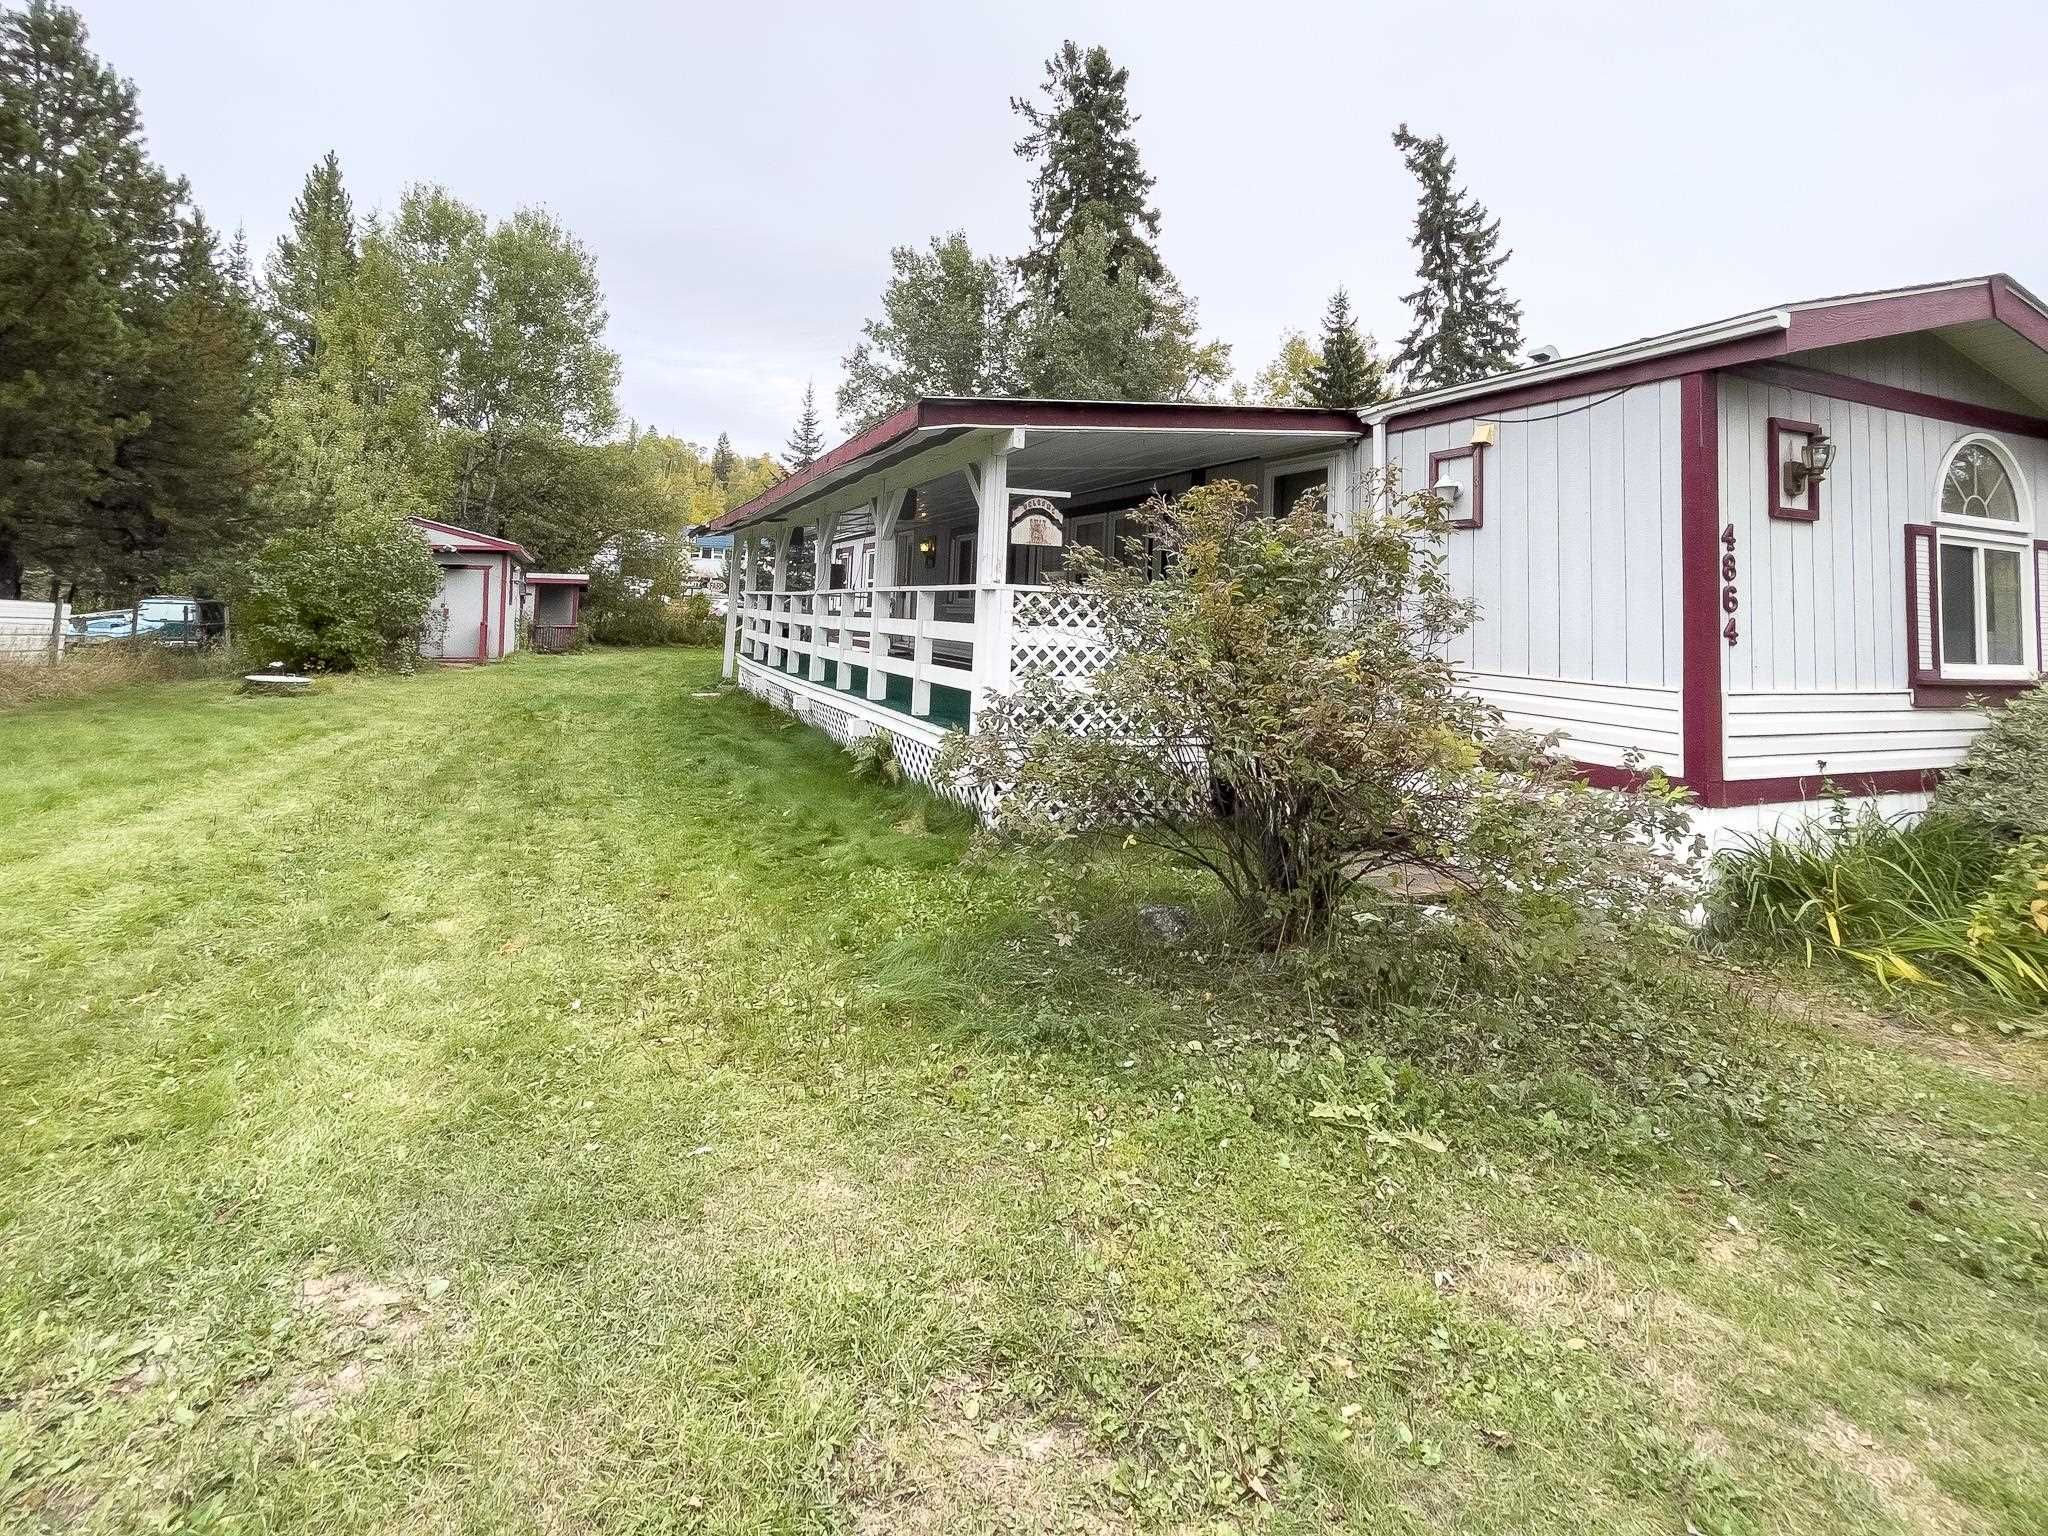 Main Photo: 4864 RANDLE Road in Prince George: Hart Highway Manufactured Home for sale (PG City North (Zone 73))  : MLS®# R2621060